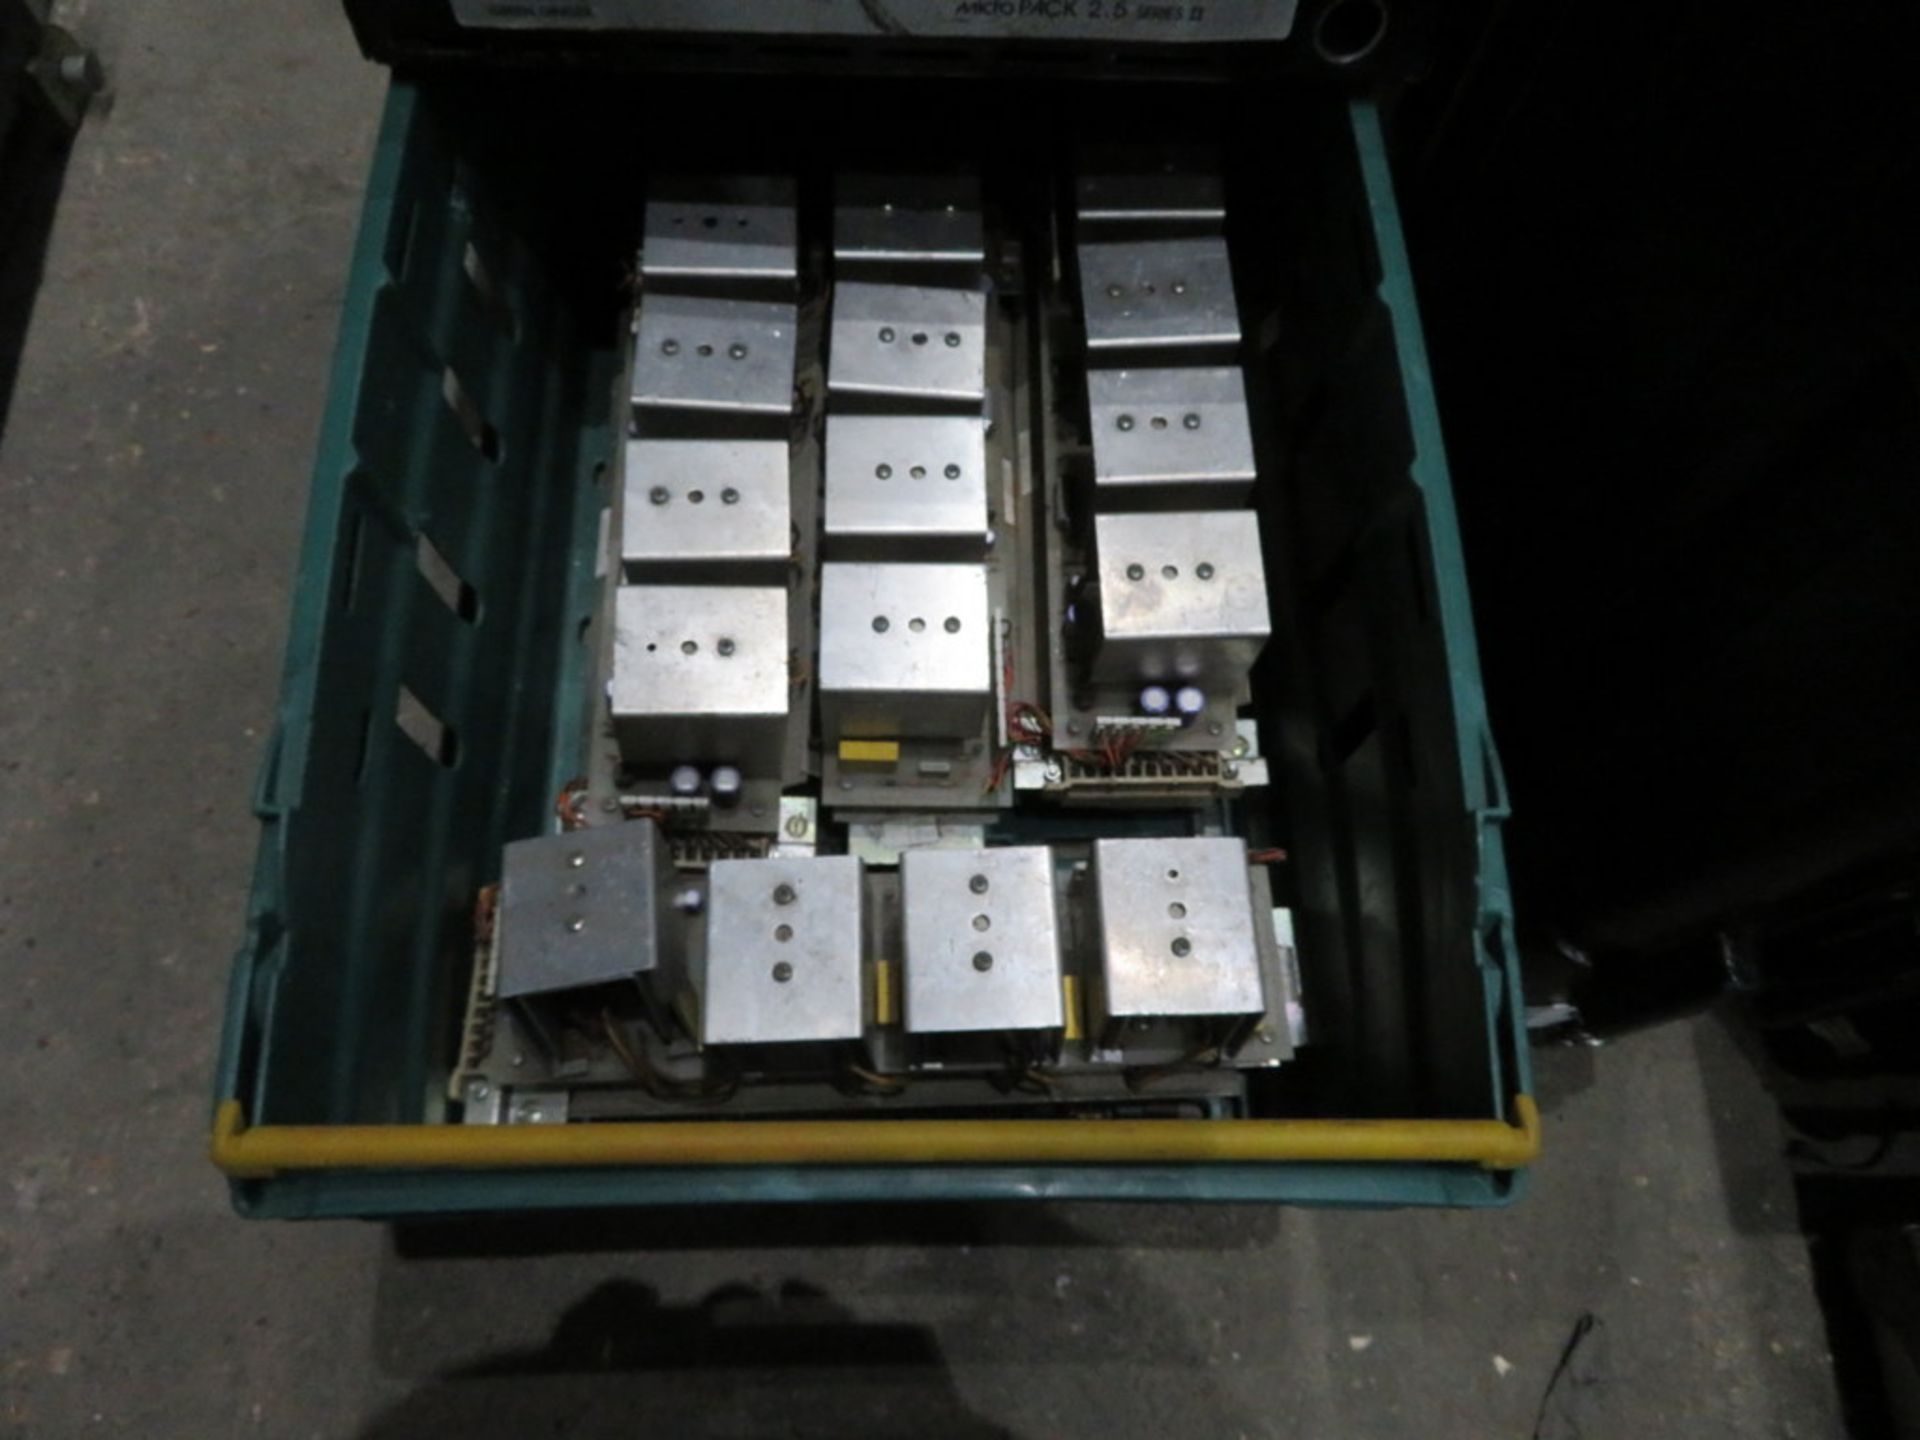 24 way Green Ginger dimmer rack in flight case with 15A sockets & 24 way Zero 88 Siris lighting des - Image 5 of 6